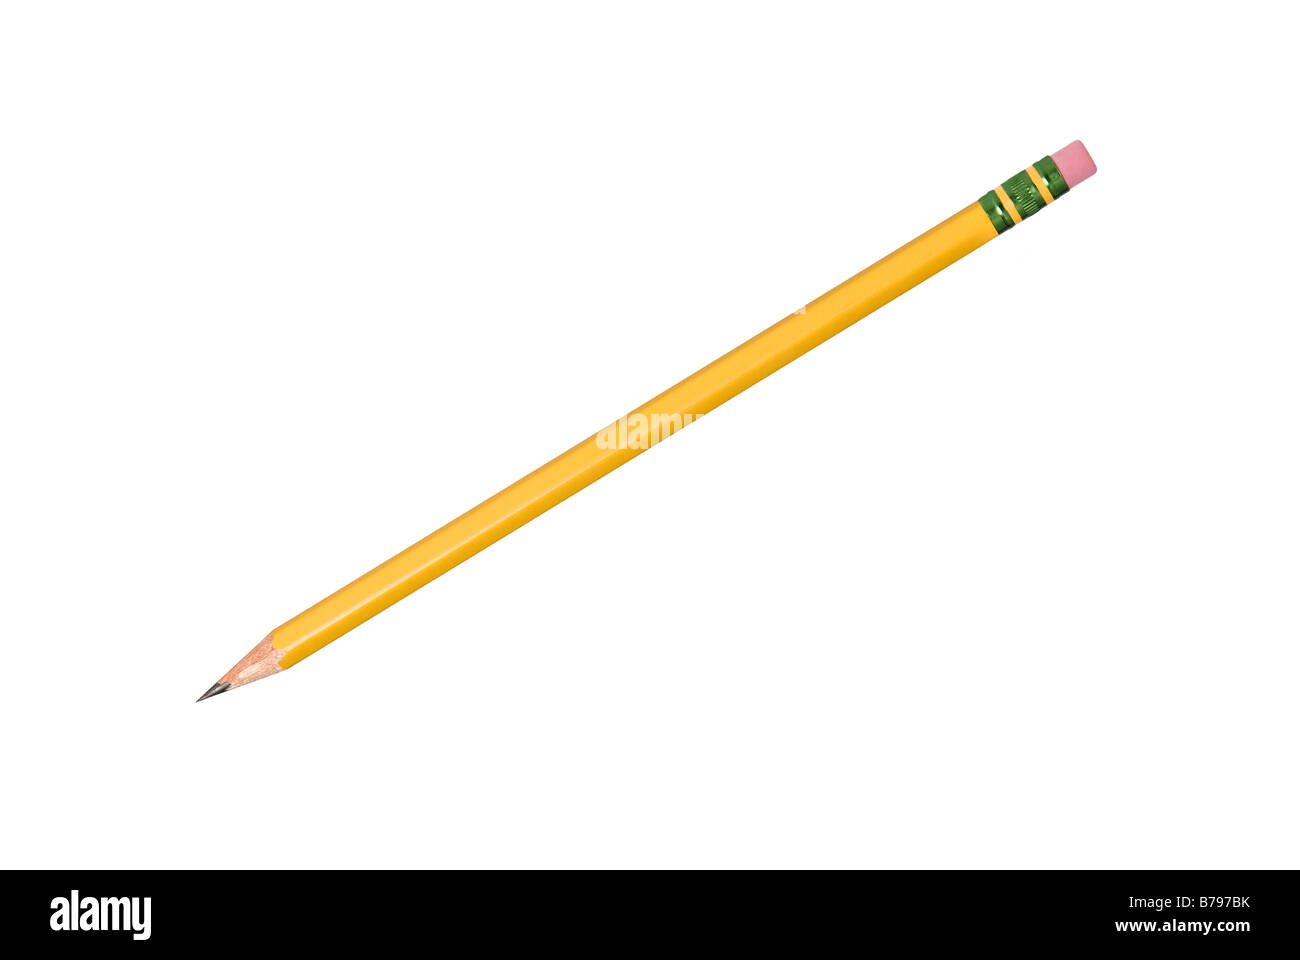 An isolated unused freshly sharpened pencil for use in any school or writing inference Stock Photo